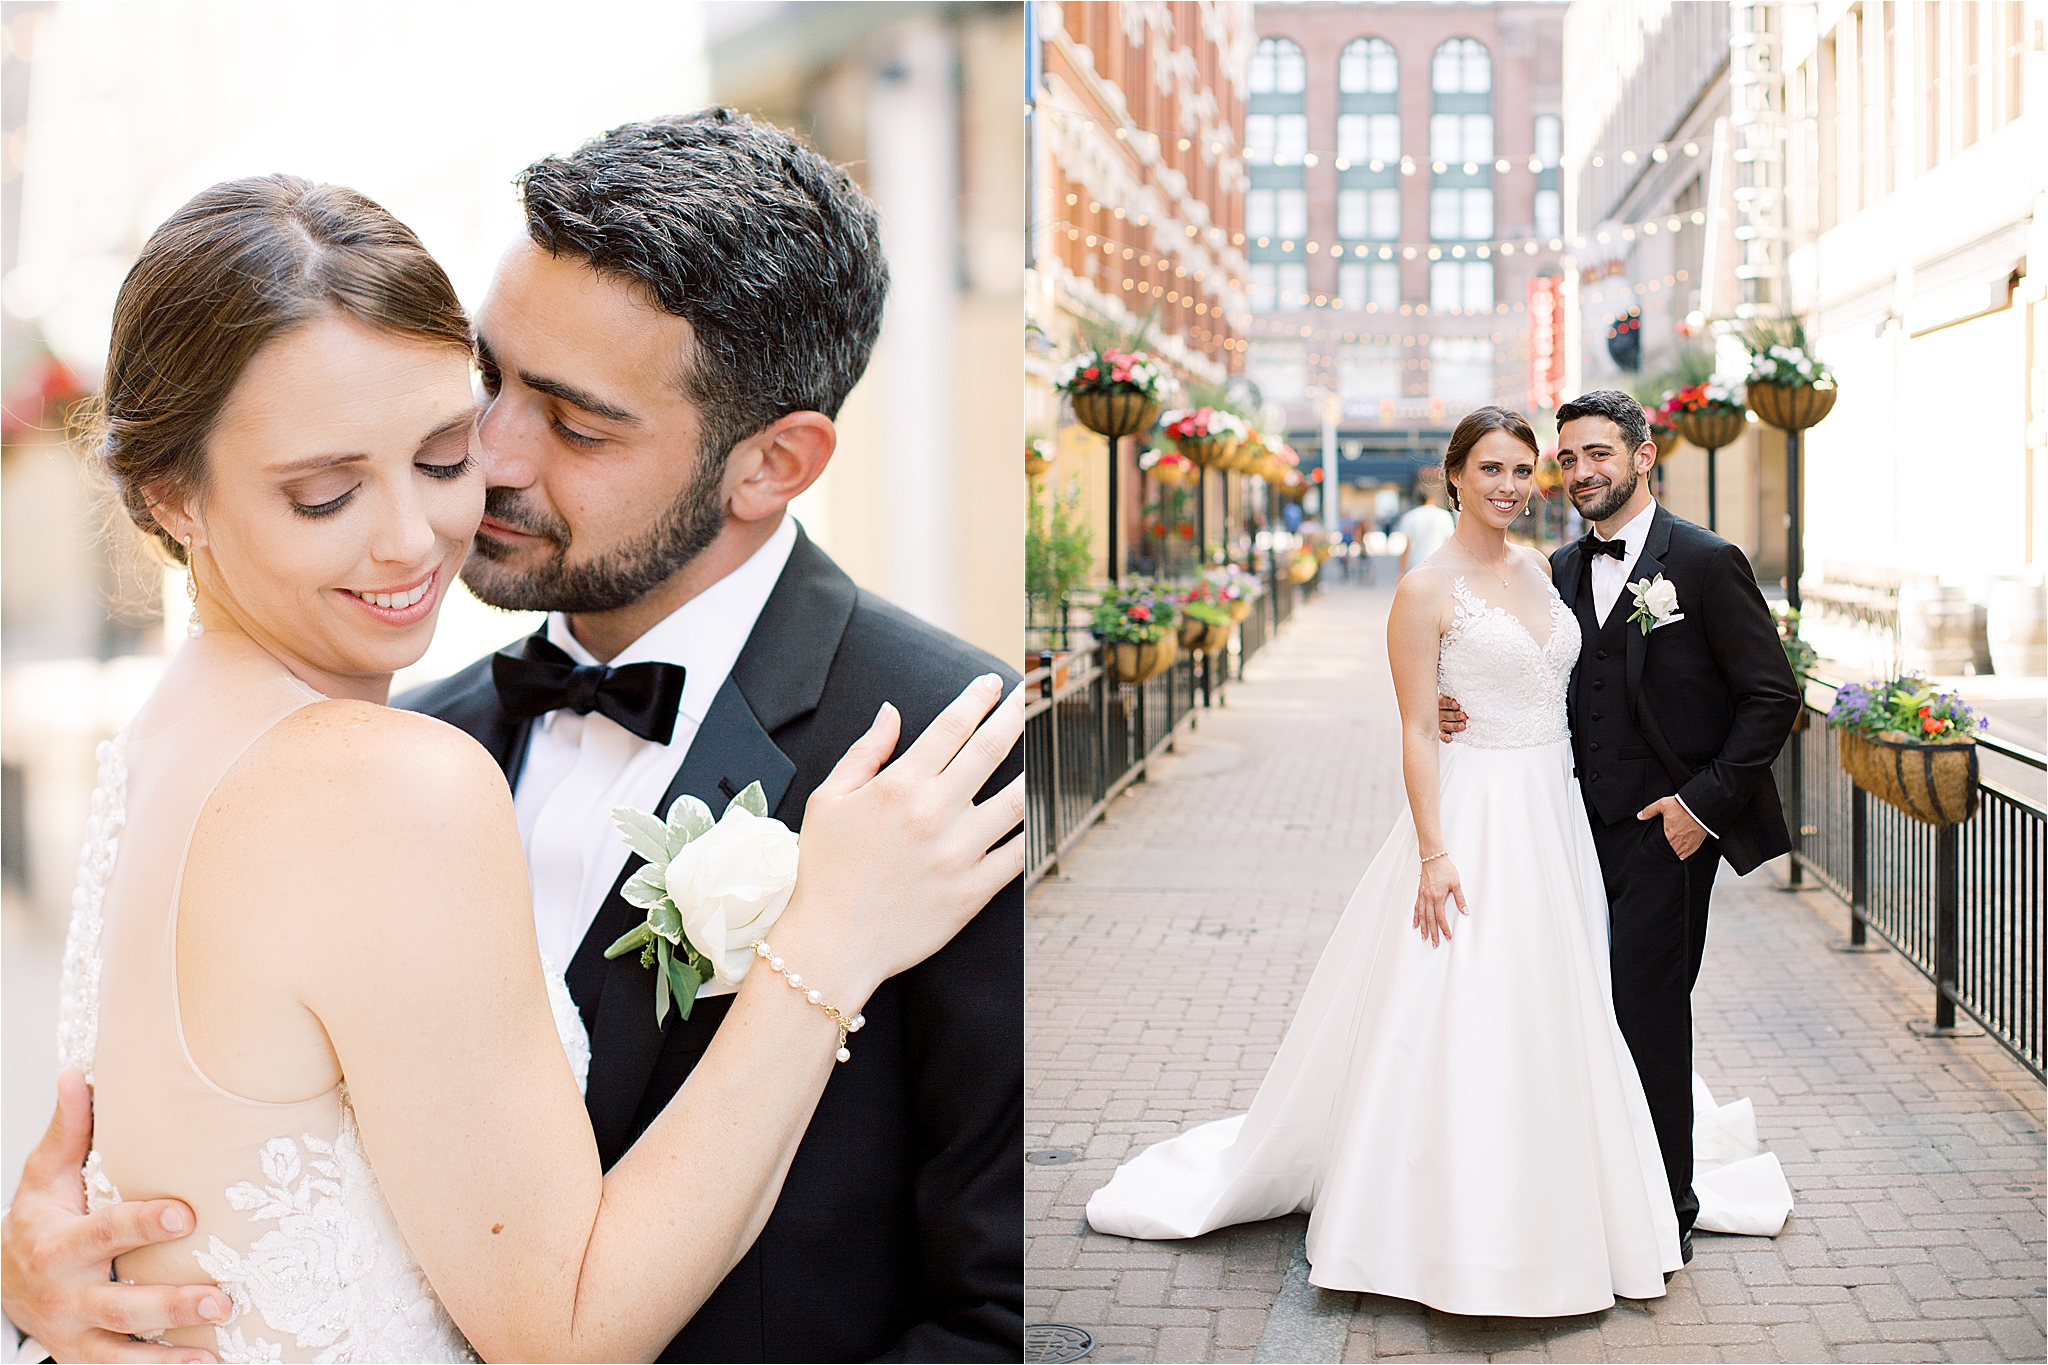 Bride and groom portrait at E 4th st. in Cleveland